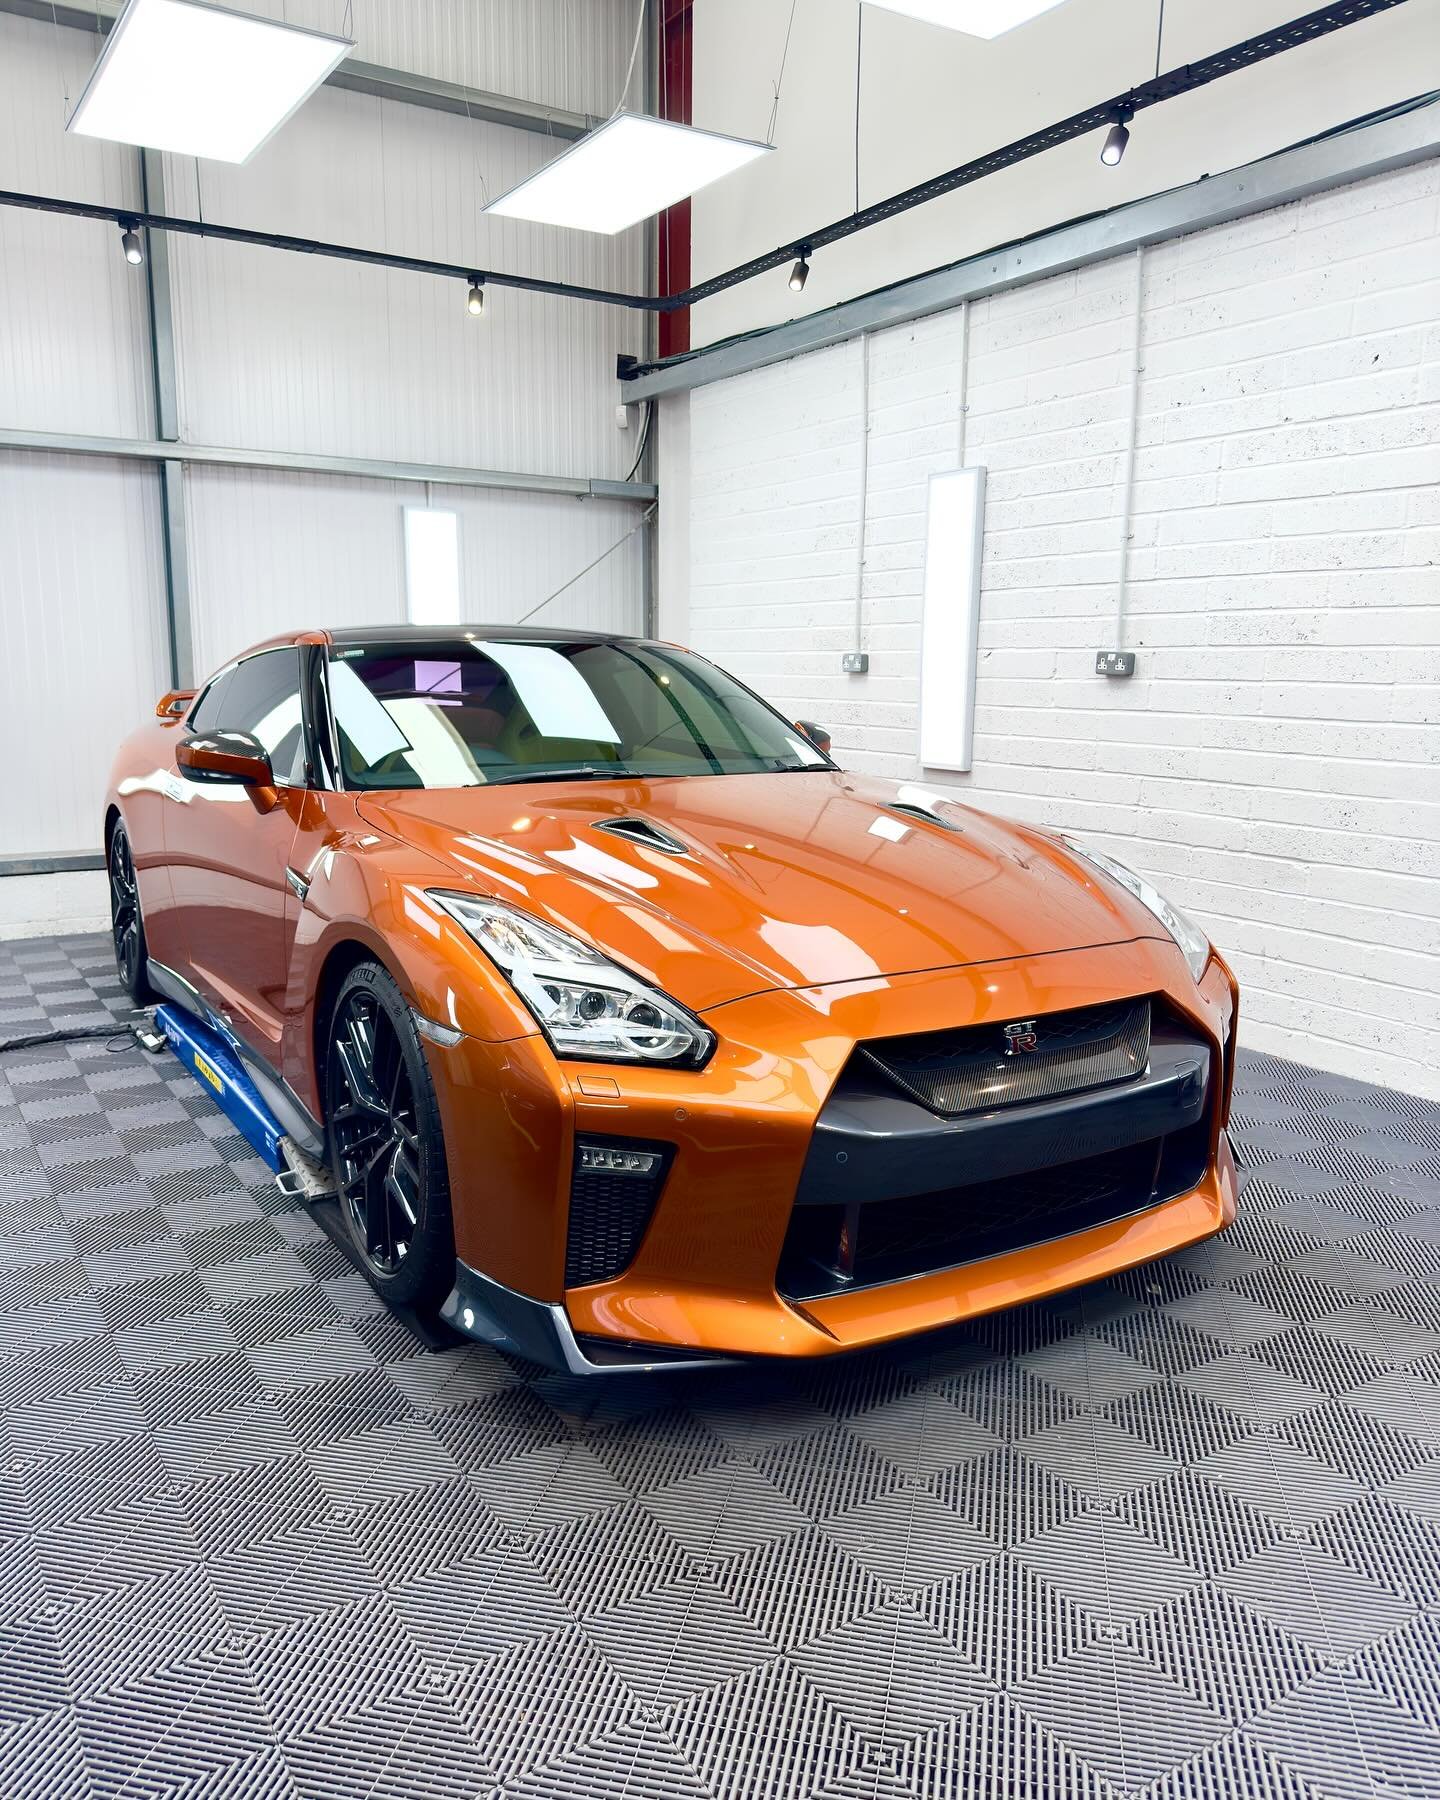 Nissan GTR finished in Katsura orange now PPF&rsquo;d in the vulnerable areas preventing stone chips and road rash to the front end. Suntek Reaction self healing PPF enhancing the appearance of the paintwork whilst adding a layer of crucial protectio